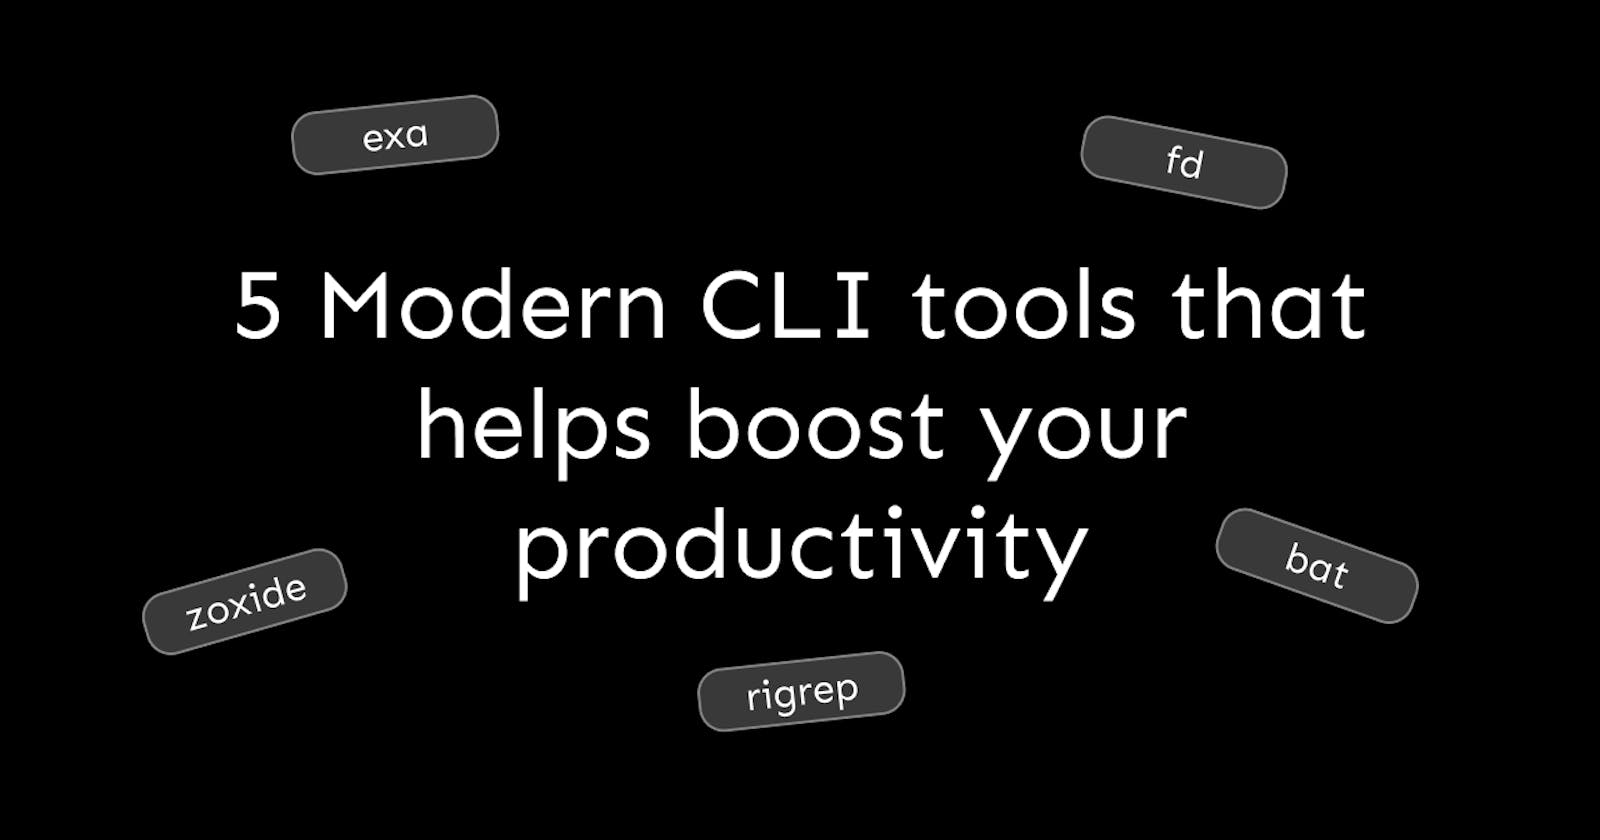 5 Modern CLI tools that help boost your productivity